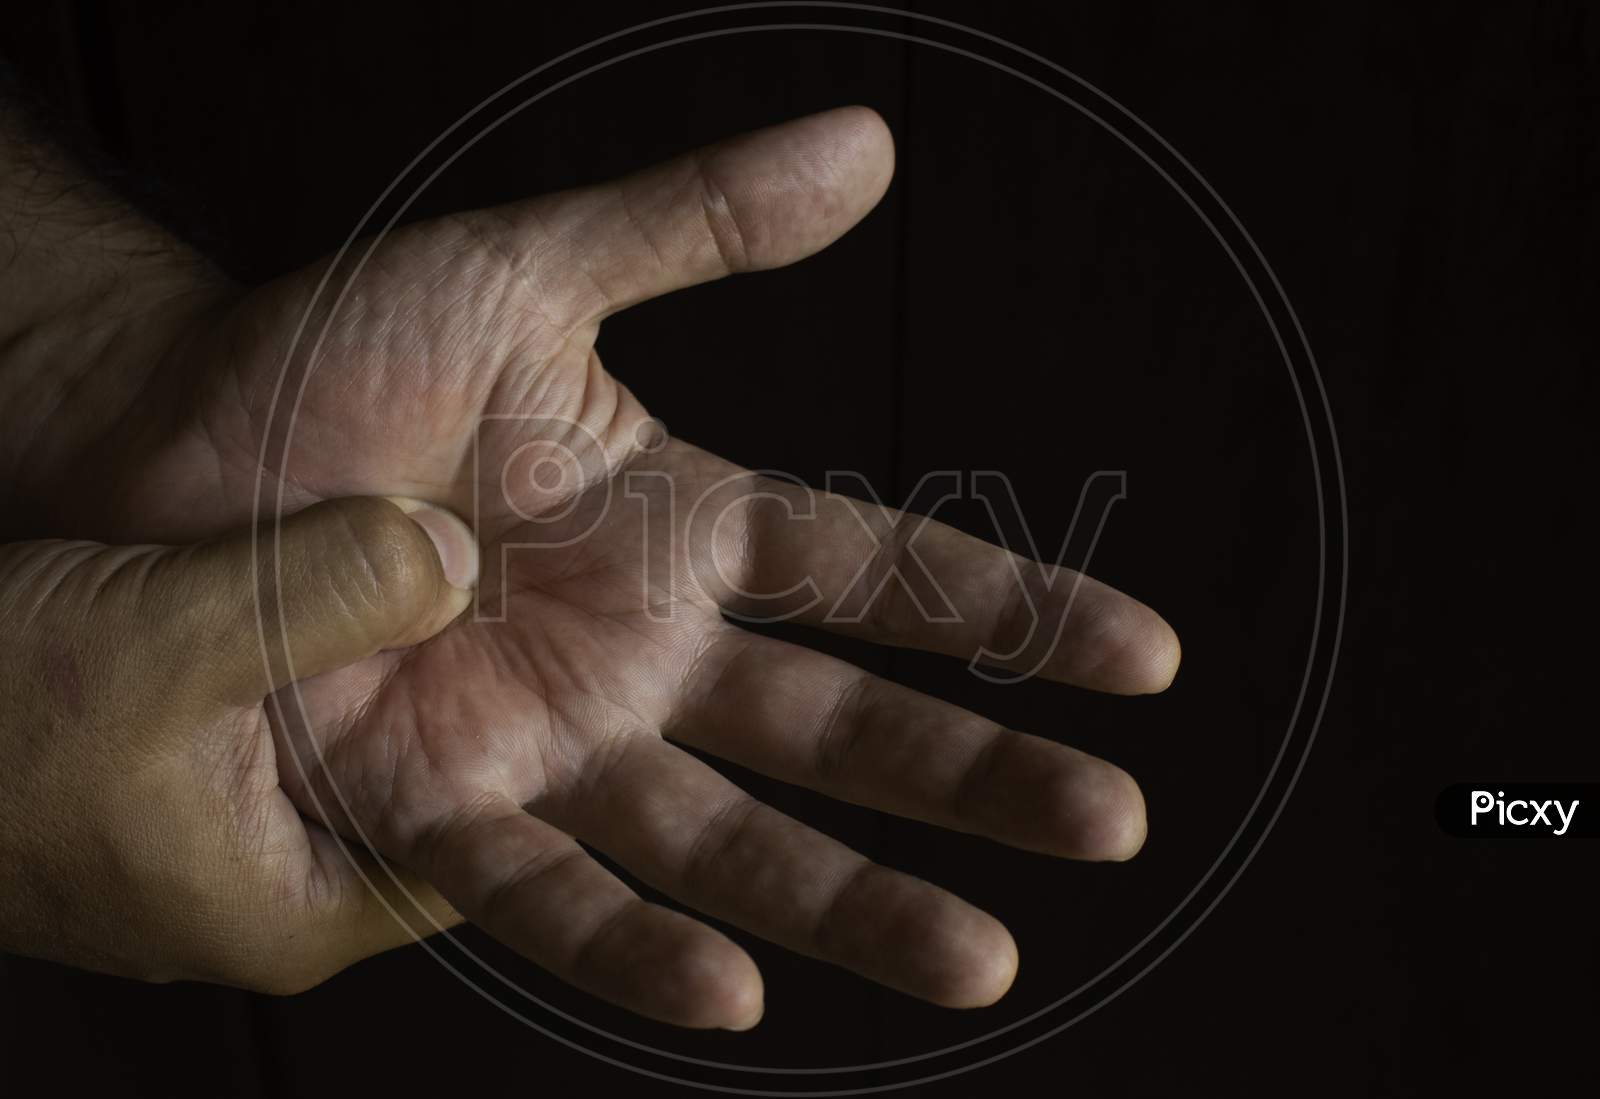 Adult Man With Pain In His Hands. Automassage Of Hands To Relieve Pain.